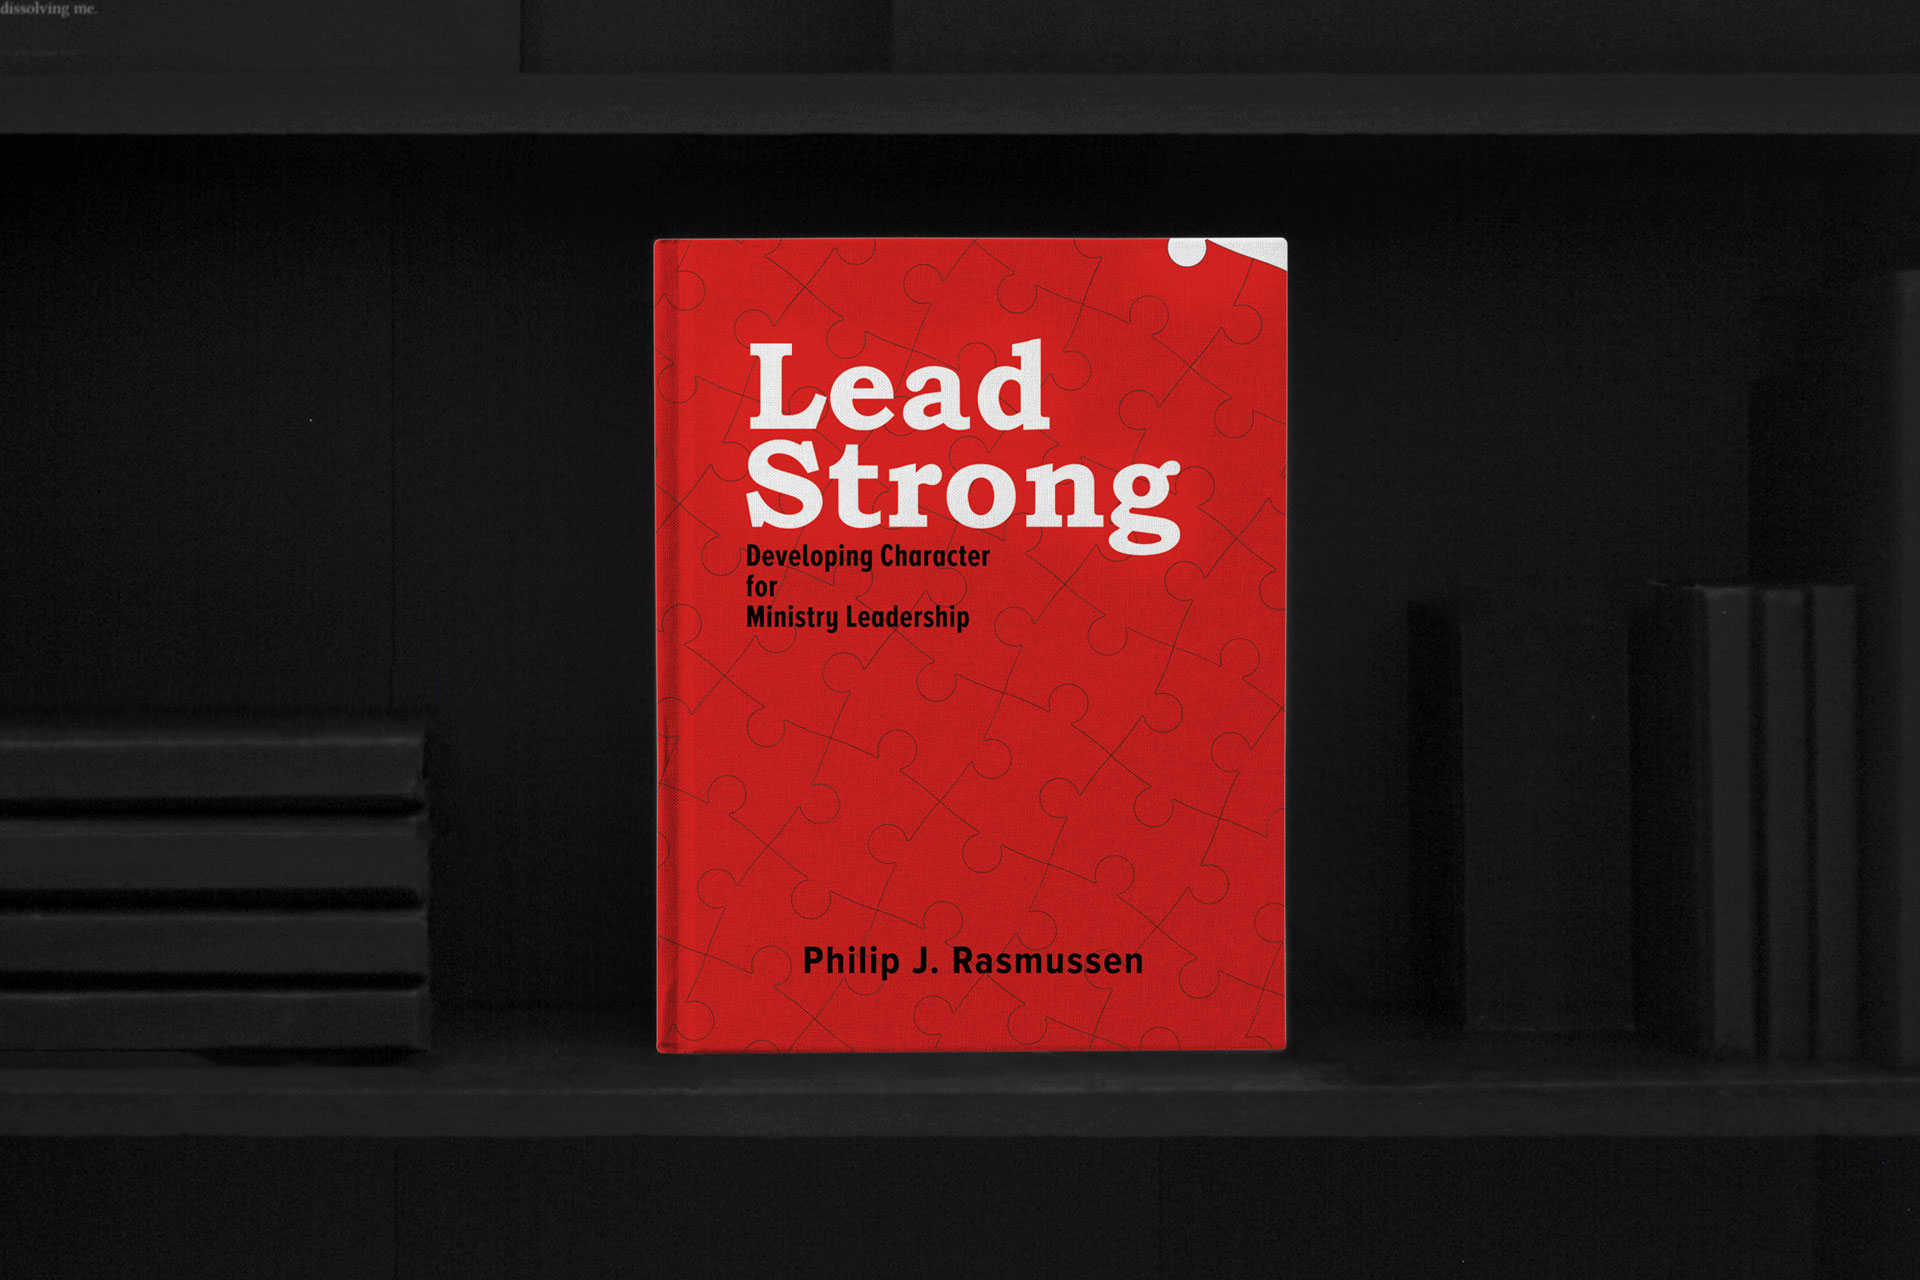 Lead Strong book by Philip J. Rasmussen